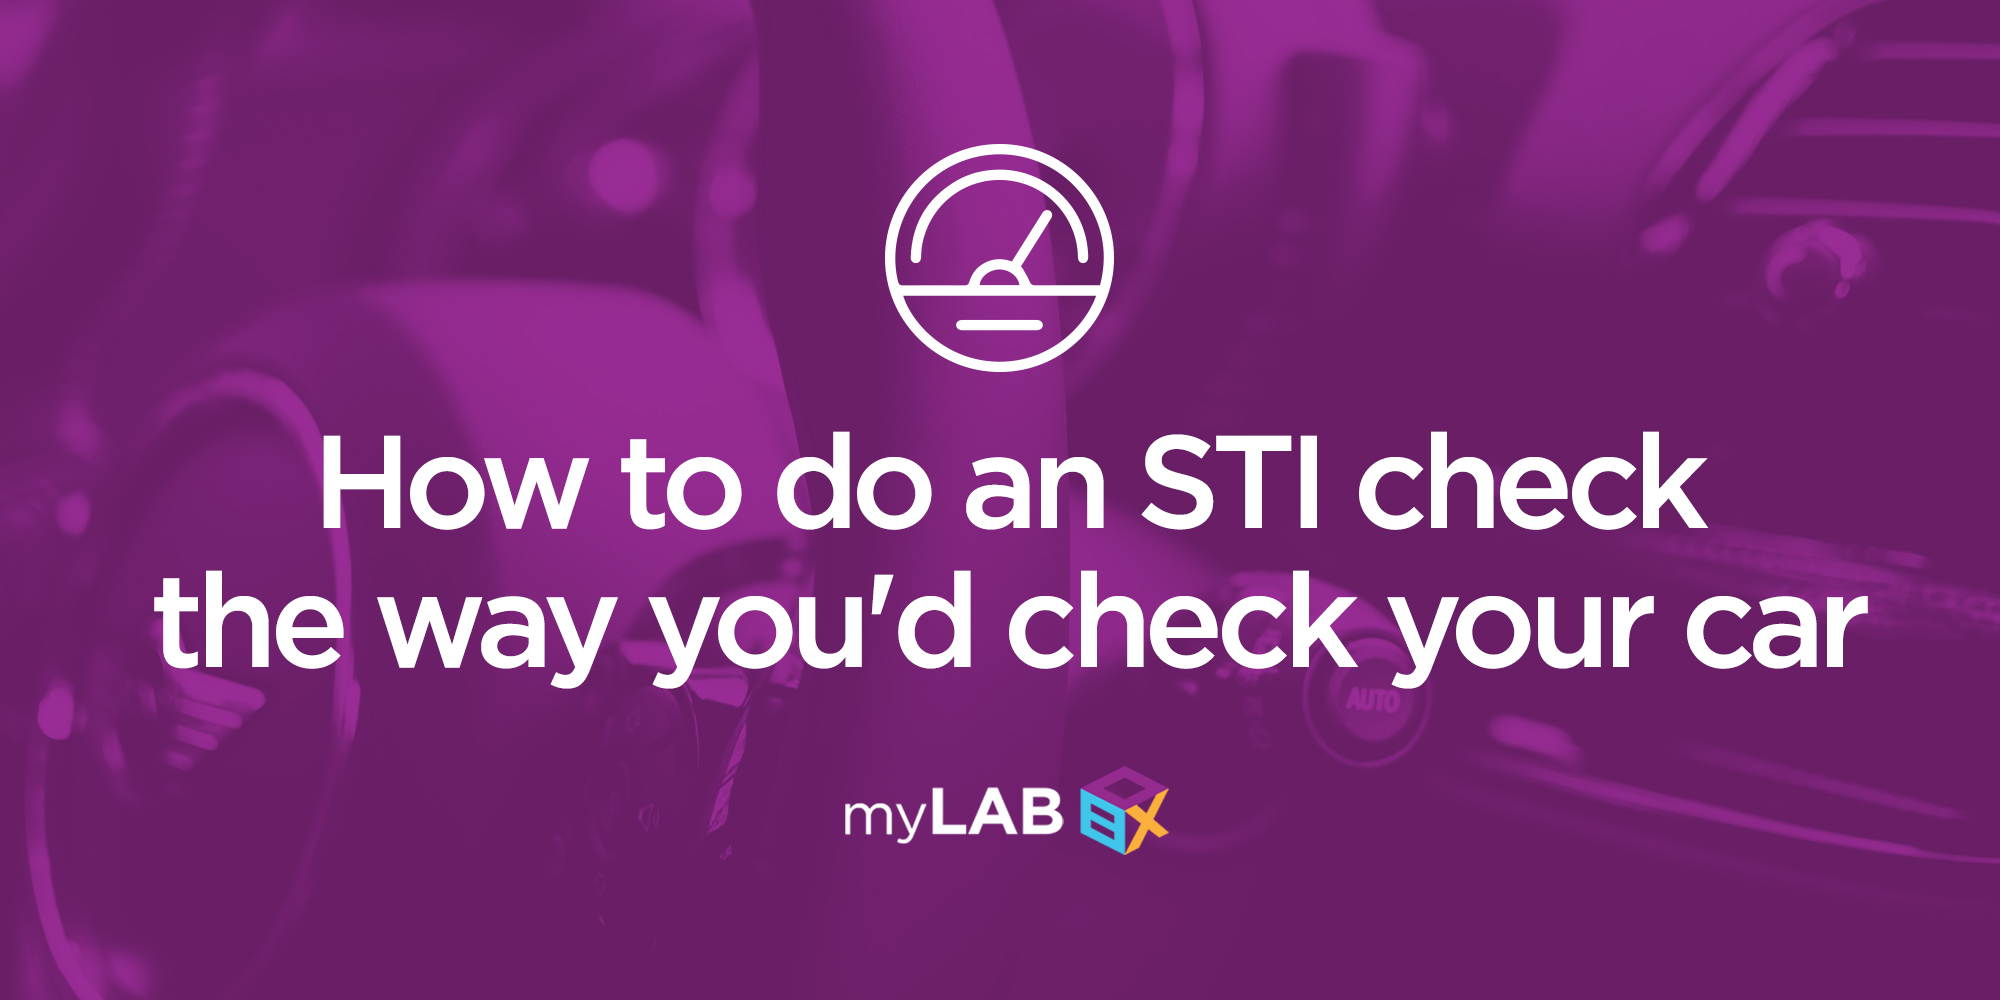 How to do an STI check the way you'd check your car